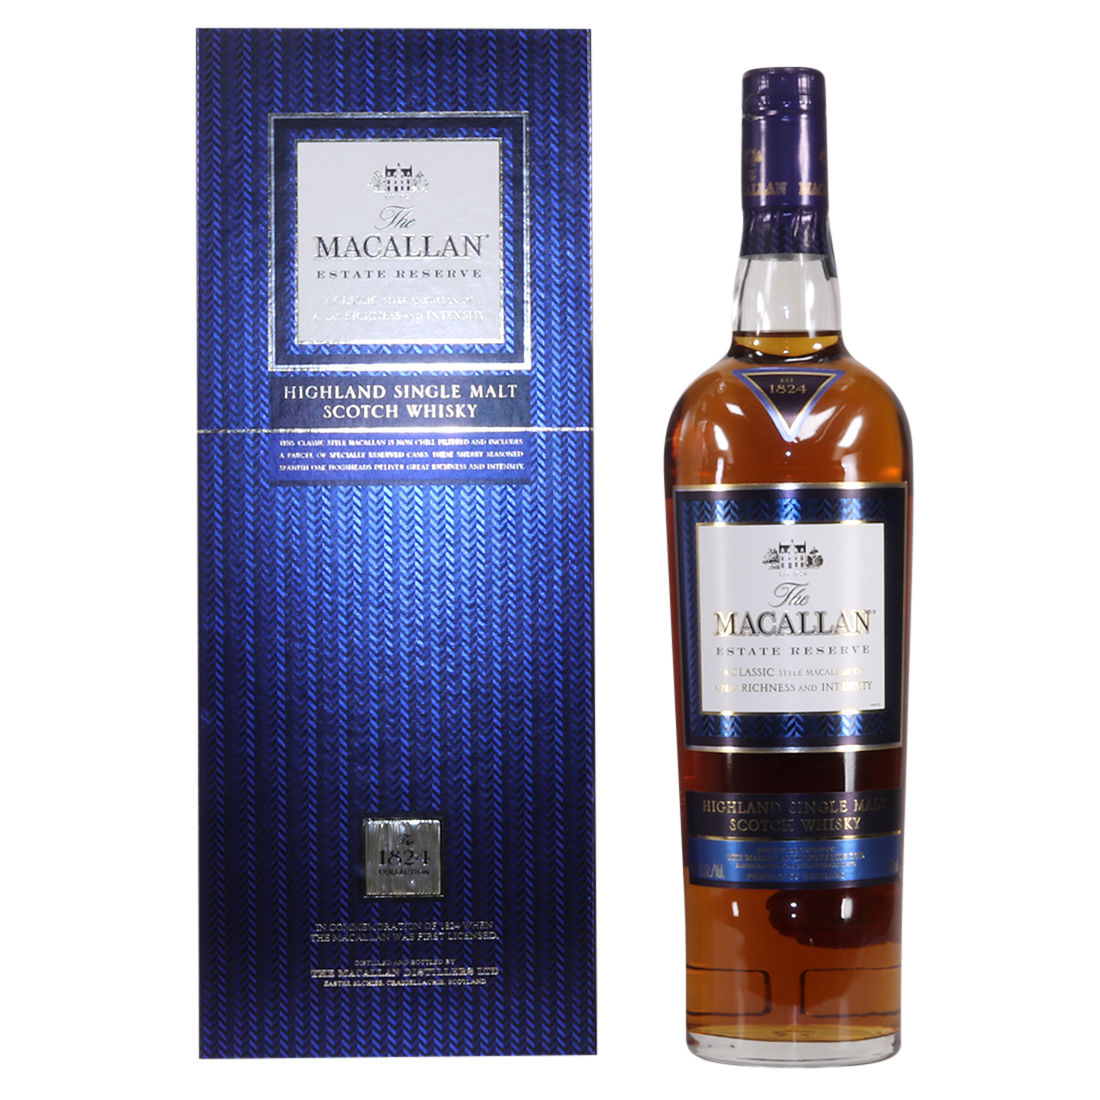 Macallan Estate Reserve 1824 Collection Auction The Grand Whisky Auction